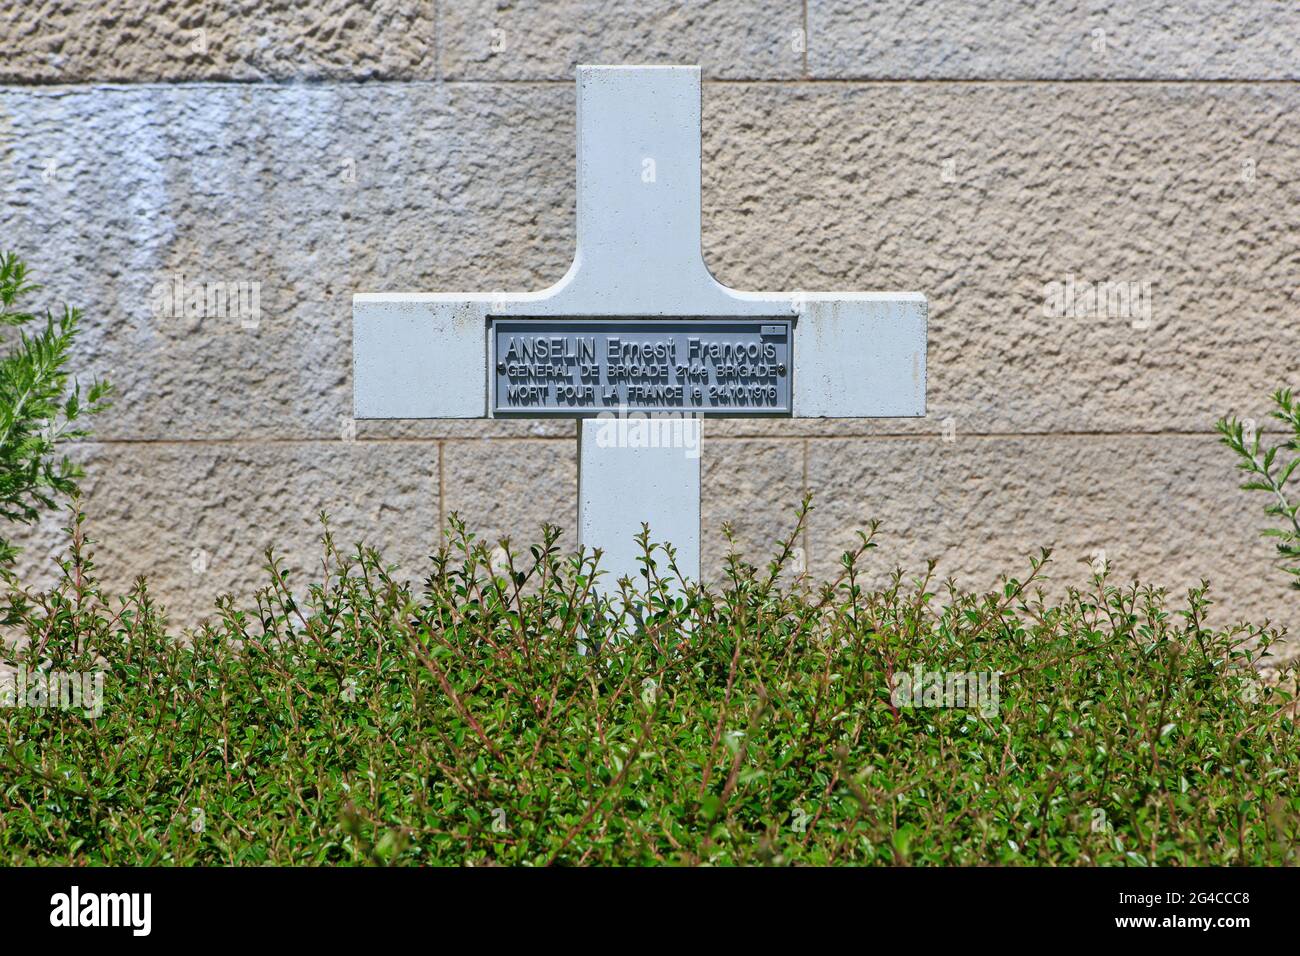 Grave of the French brigadier general Ernest François Amédée Anselin (1861-1916) at the French military cemetery in Douaumont, France Stock Photo